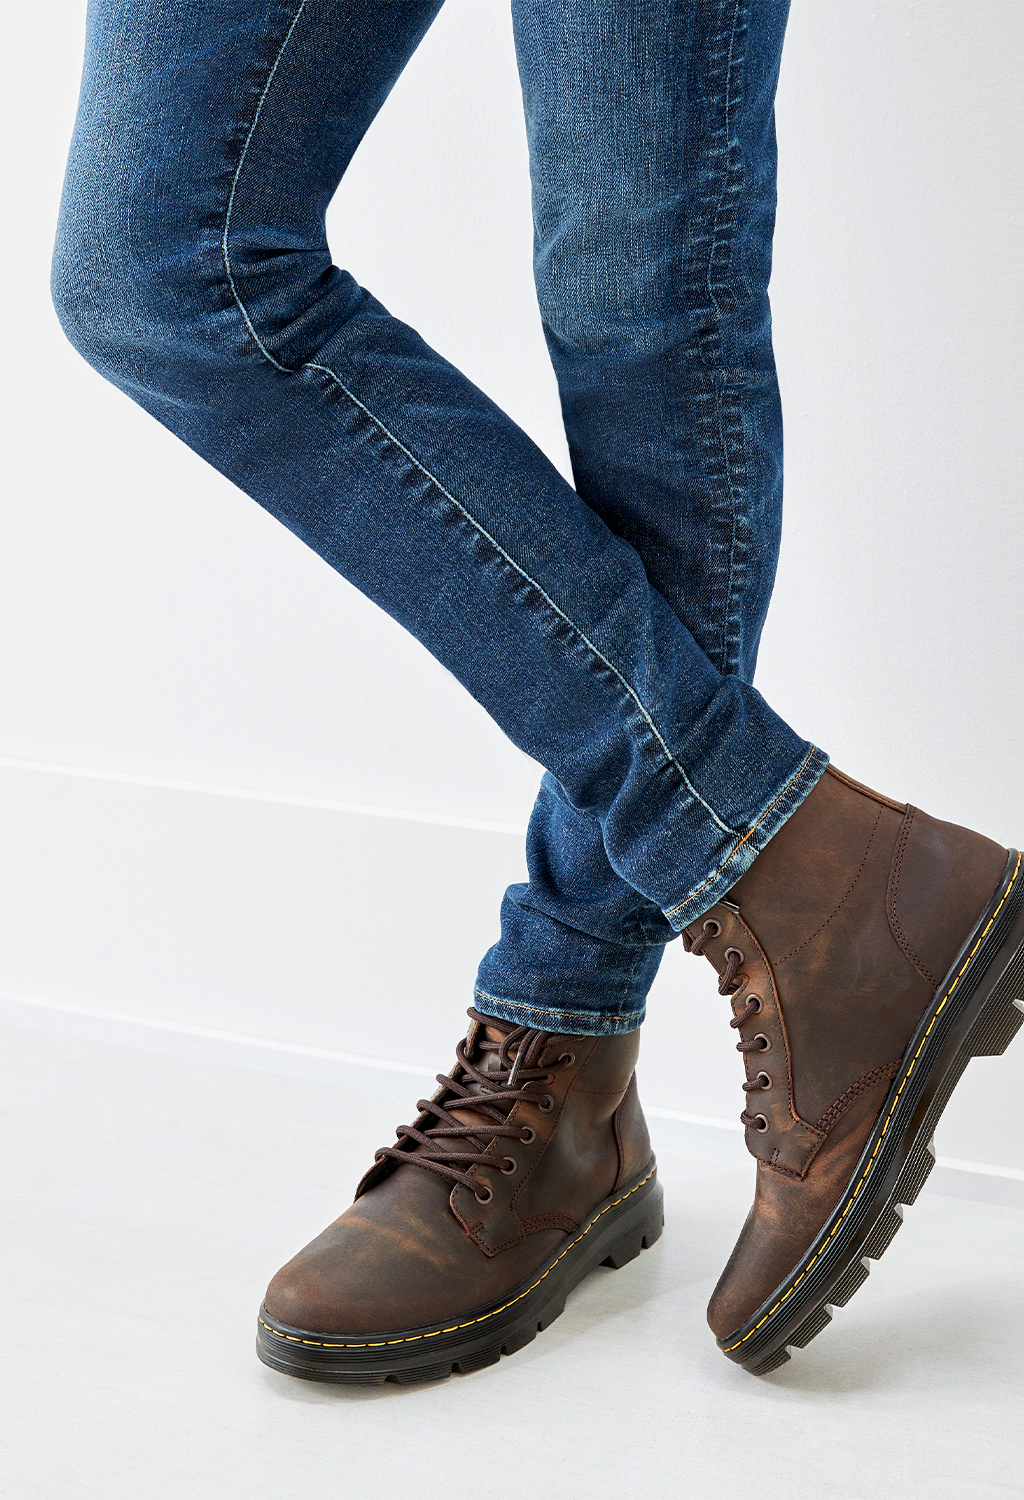 How to style: Dress shoes with Jeans | Earnest Reads